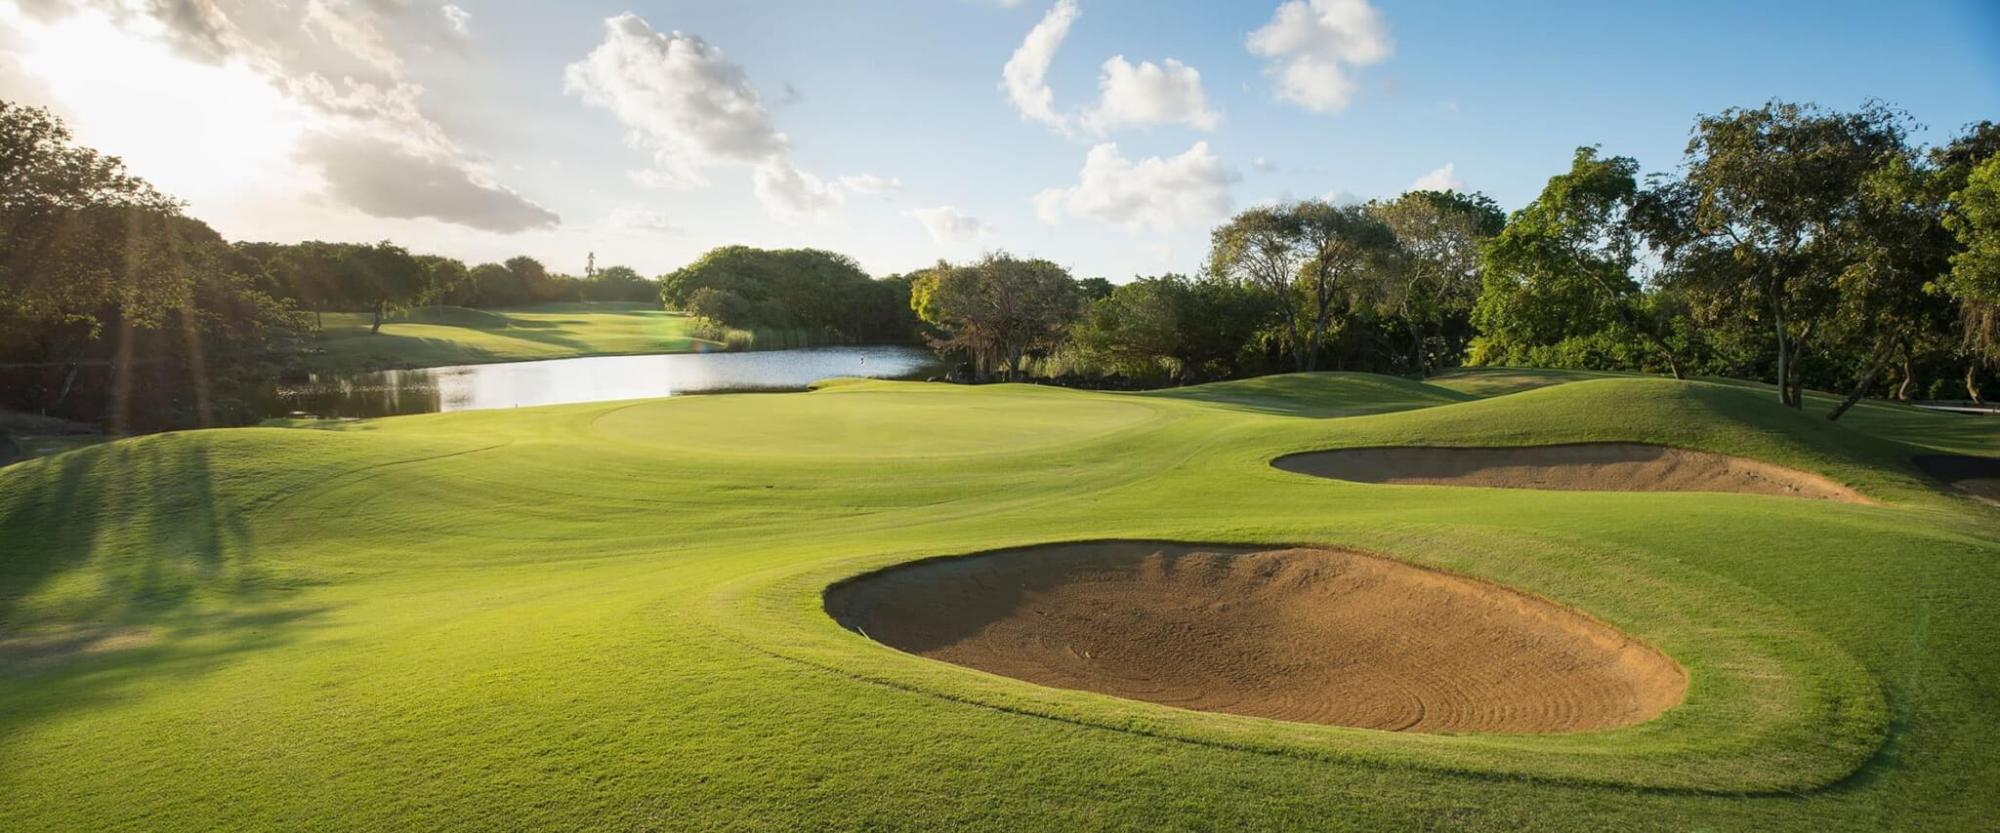 The Links  The Legend at Belle Mare Plage's picturesque golf course in incredible Mauritius.